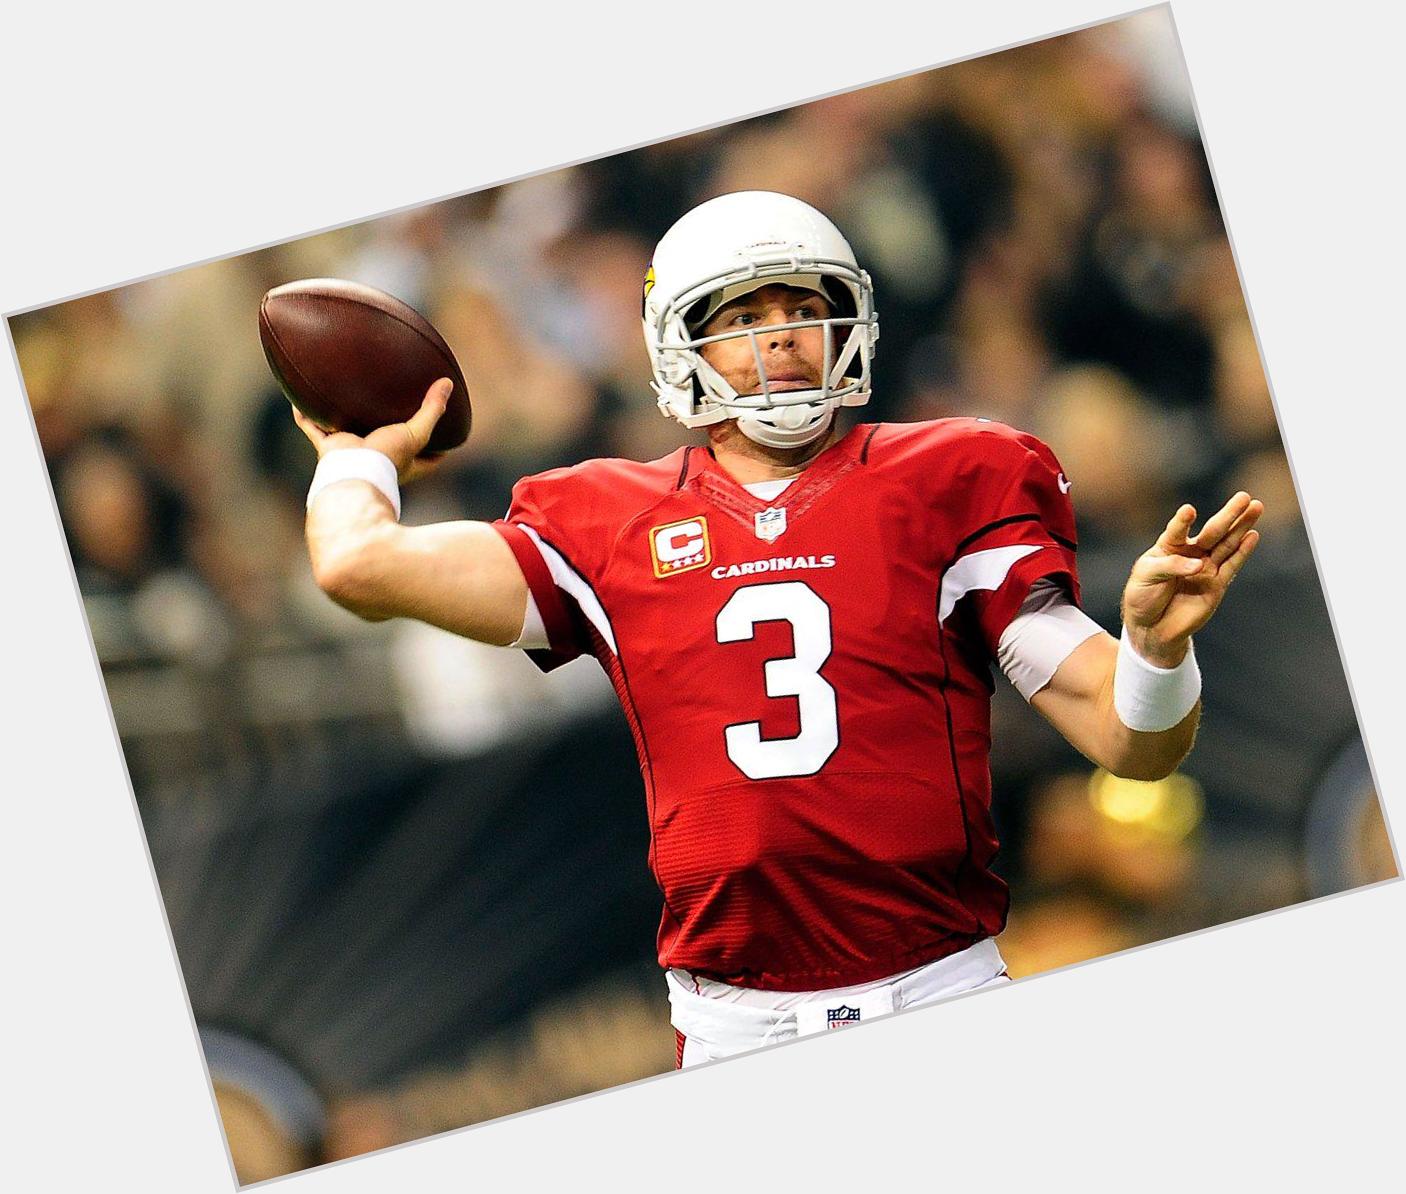 Happy Birthday to Carson Palmer, who turns 35 today! 